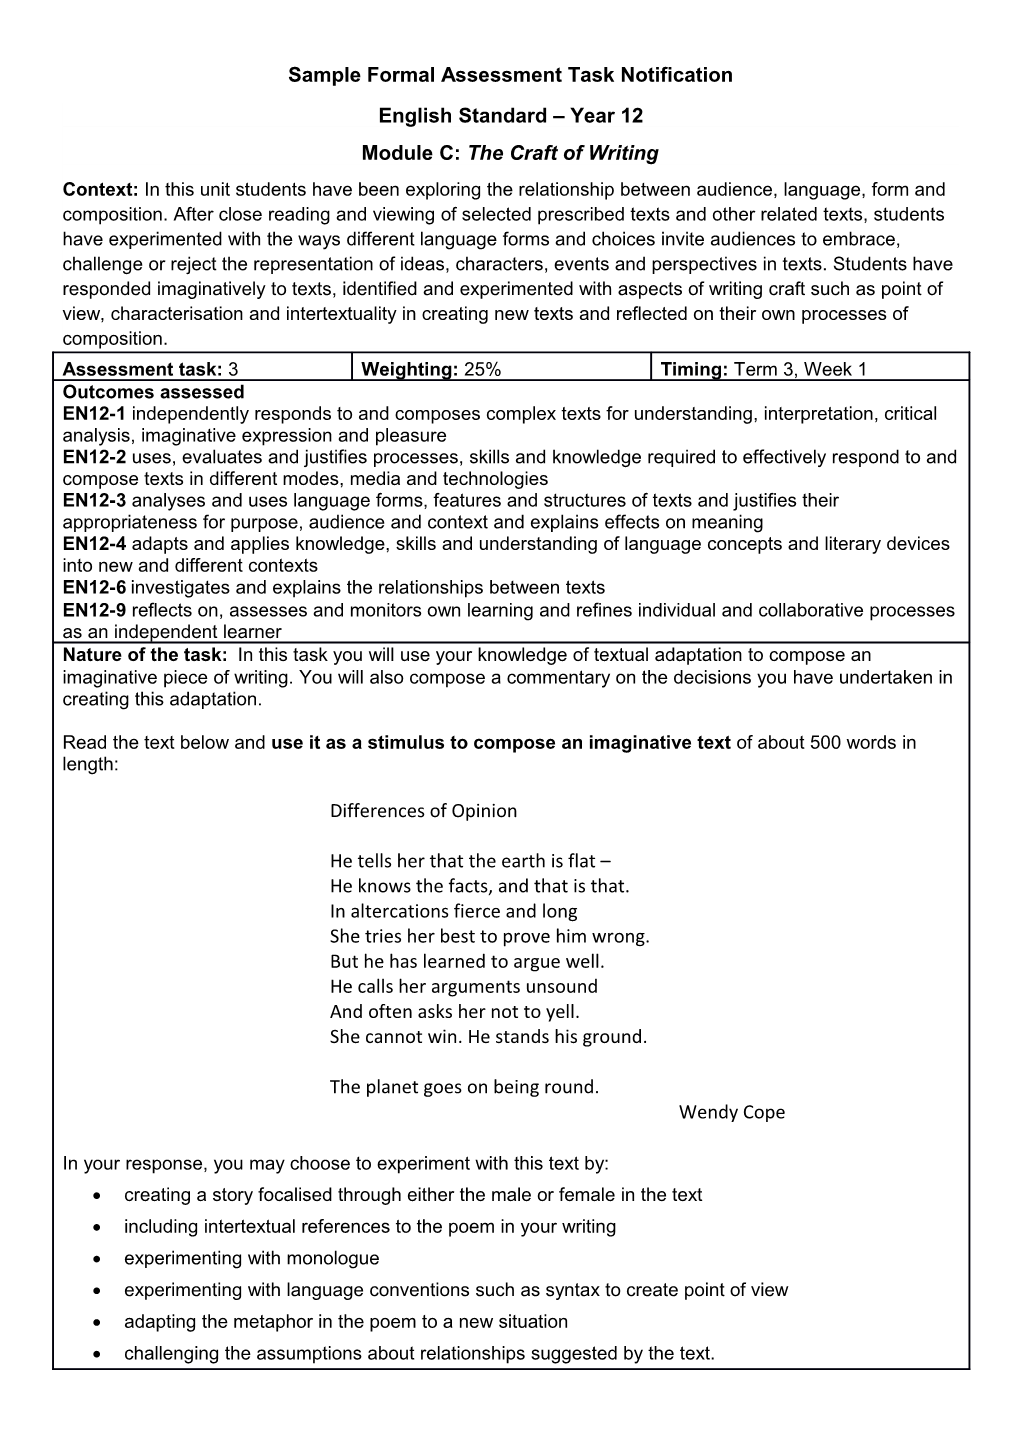 Stage 6 English Standard Support Material - Module C Sample Assessment Task